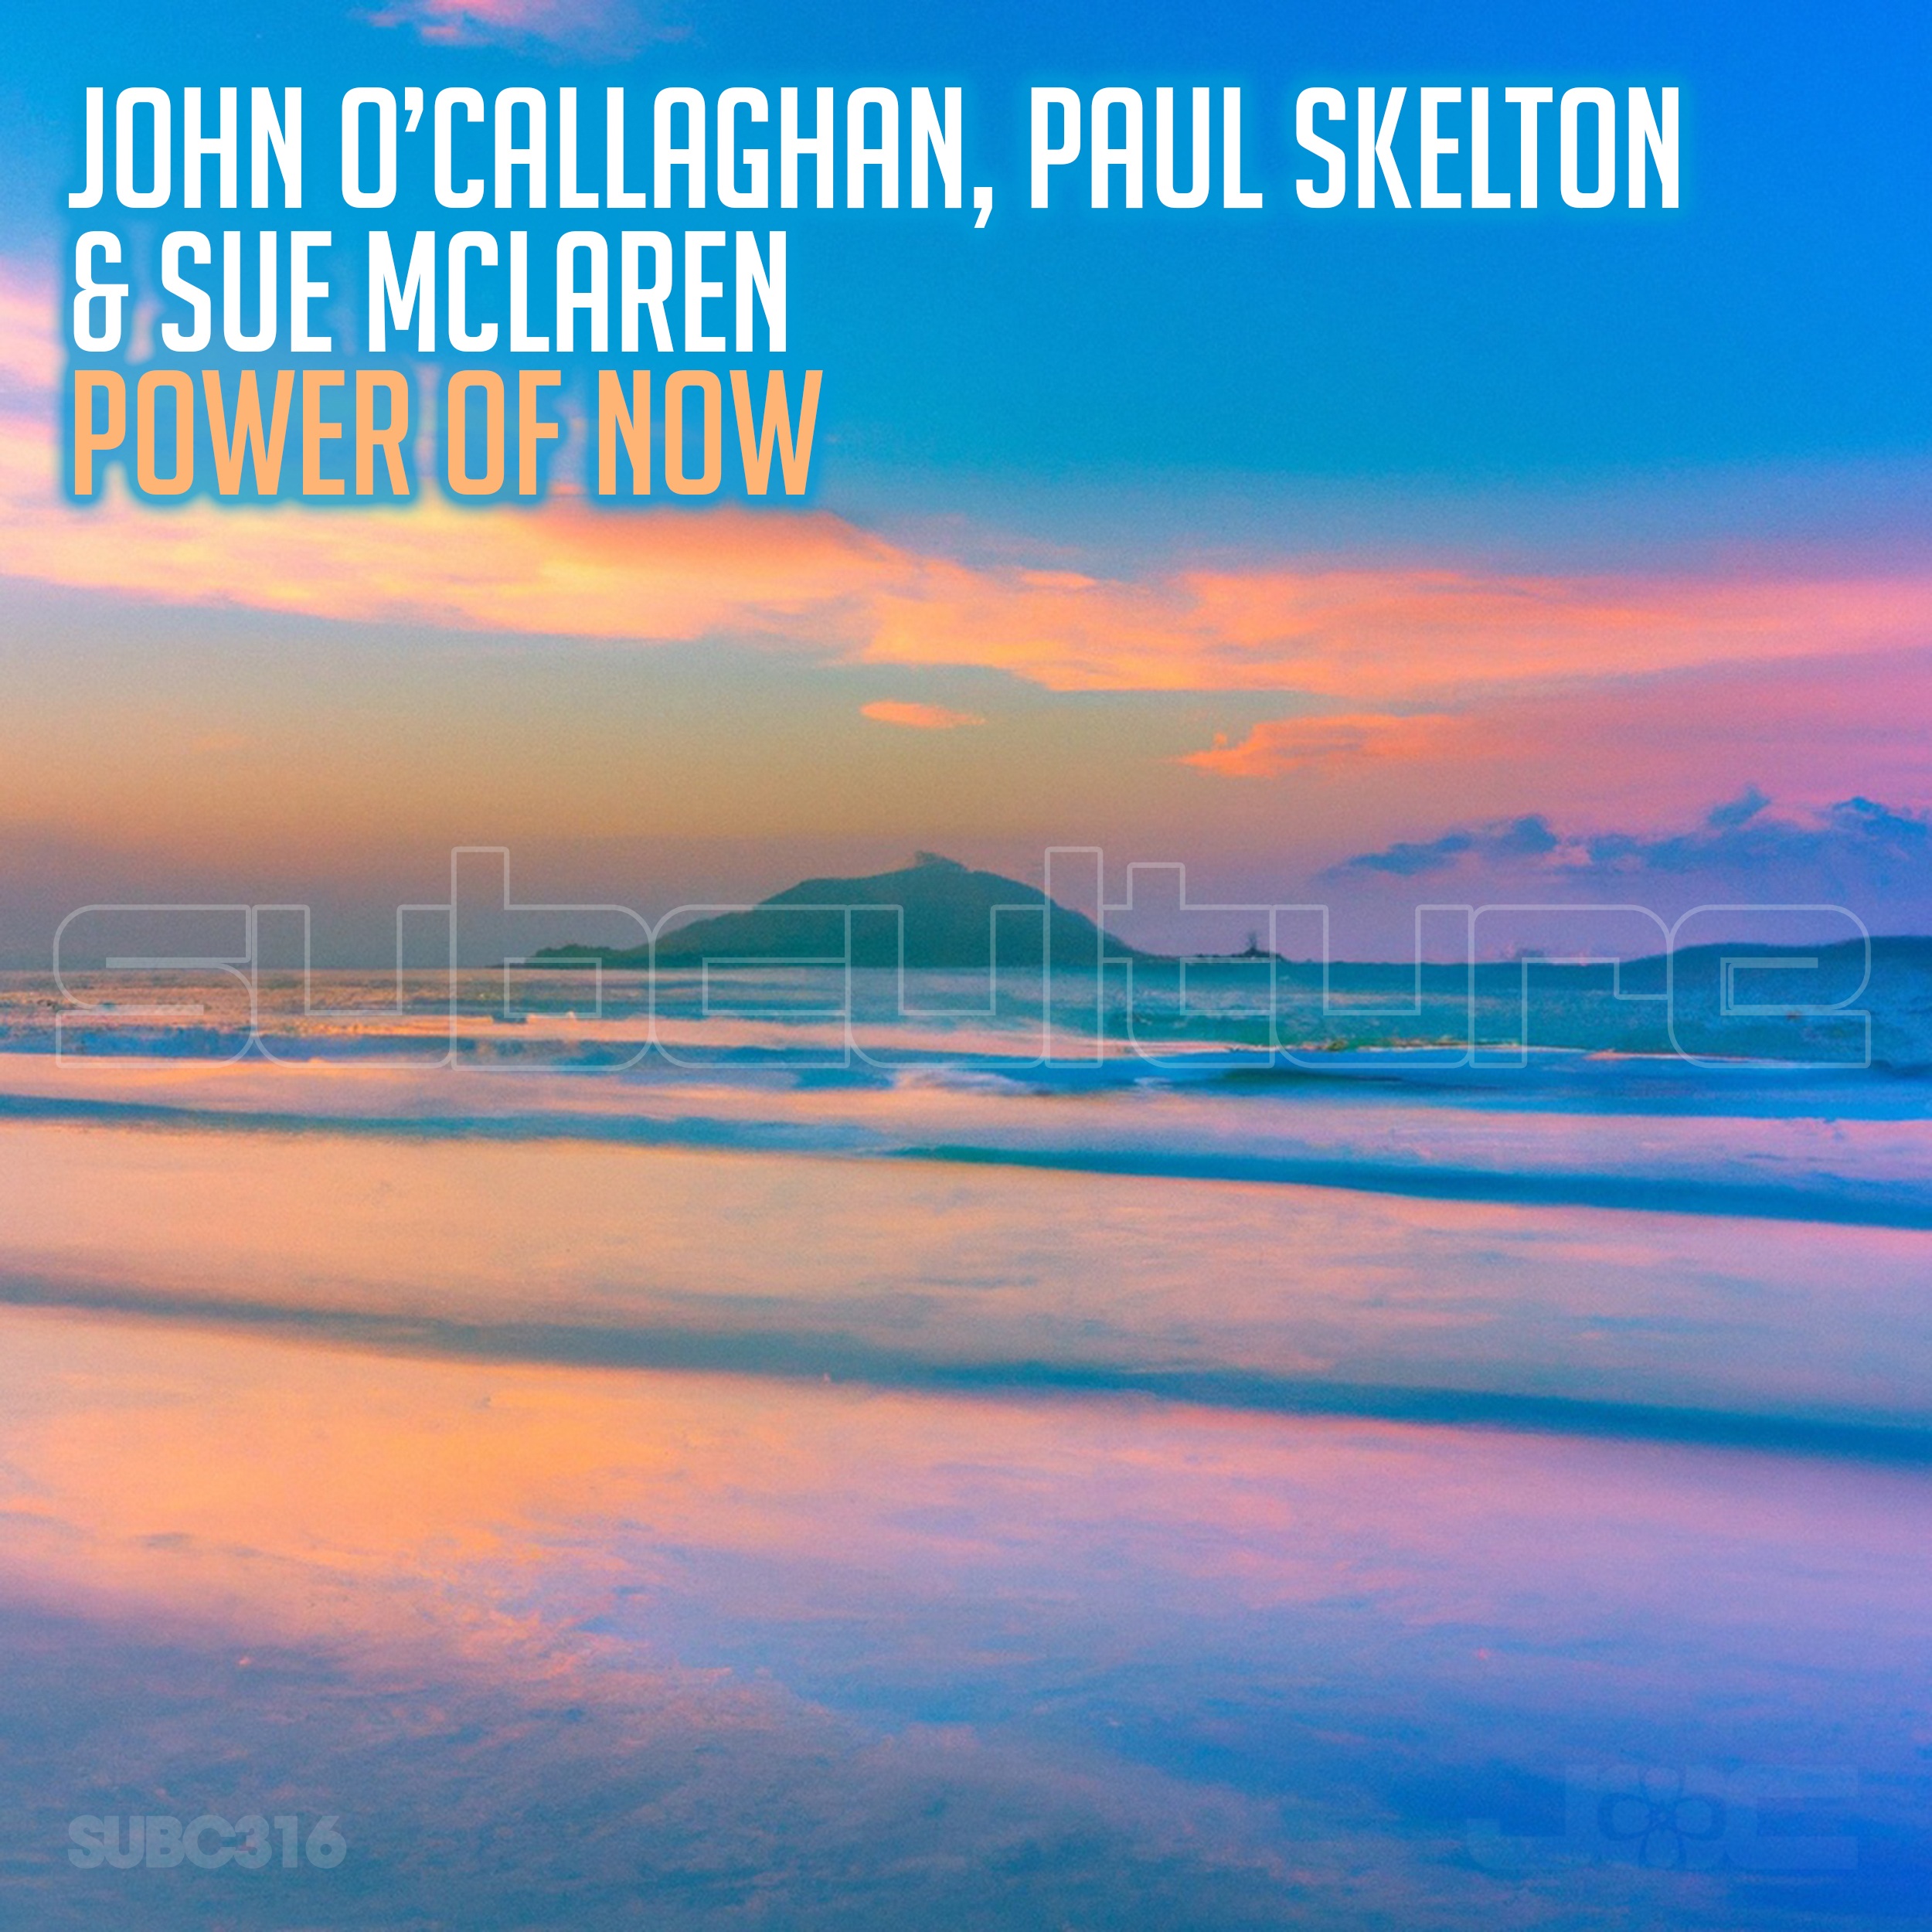 John O'Callaghan, Paul Skelton and Sue McLaren presents Power Of Now on Black Hole Recordings